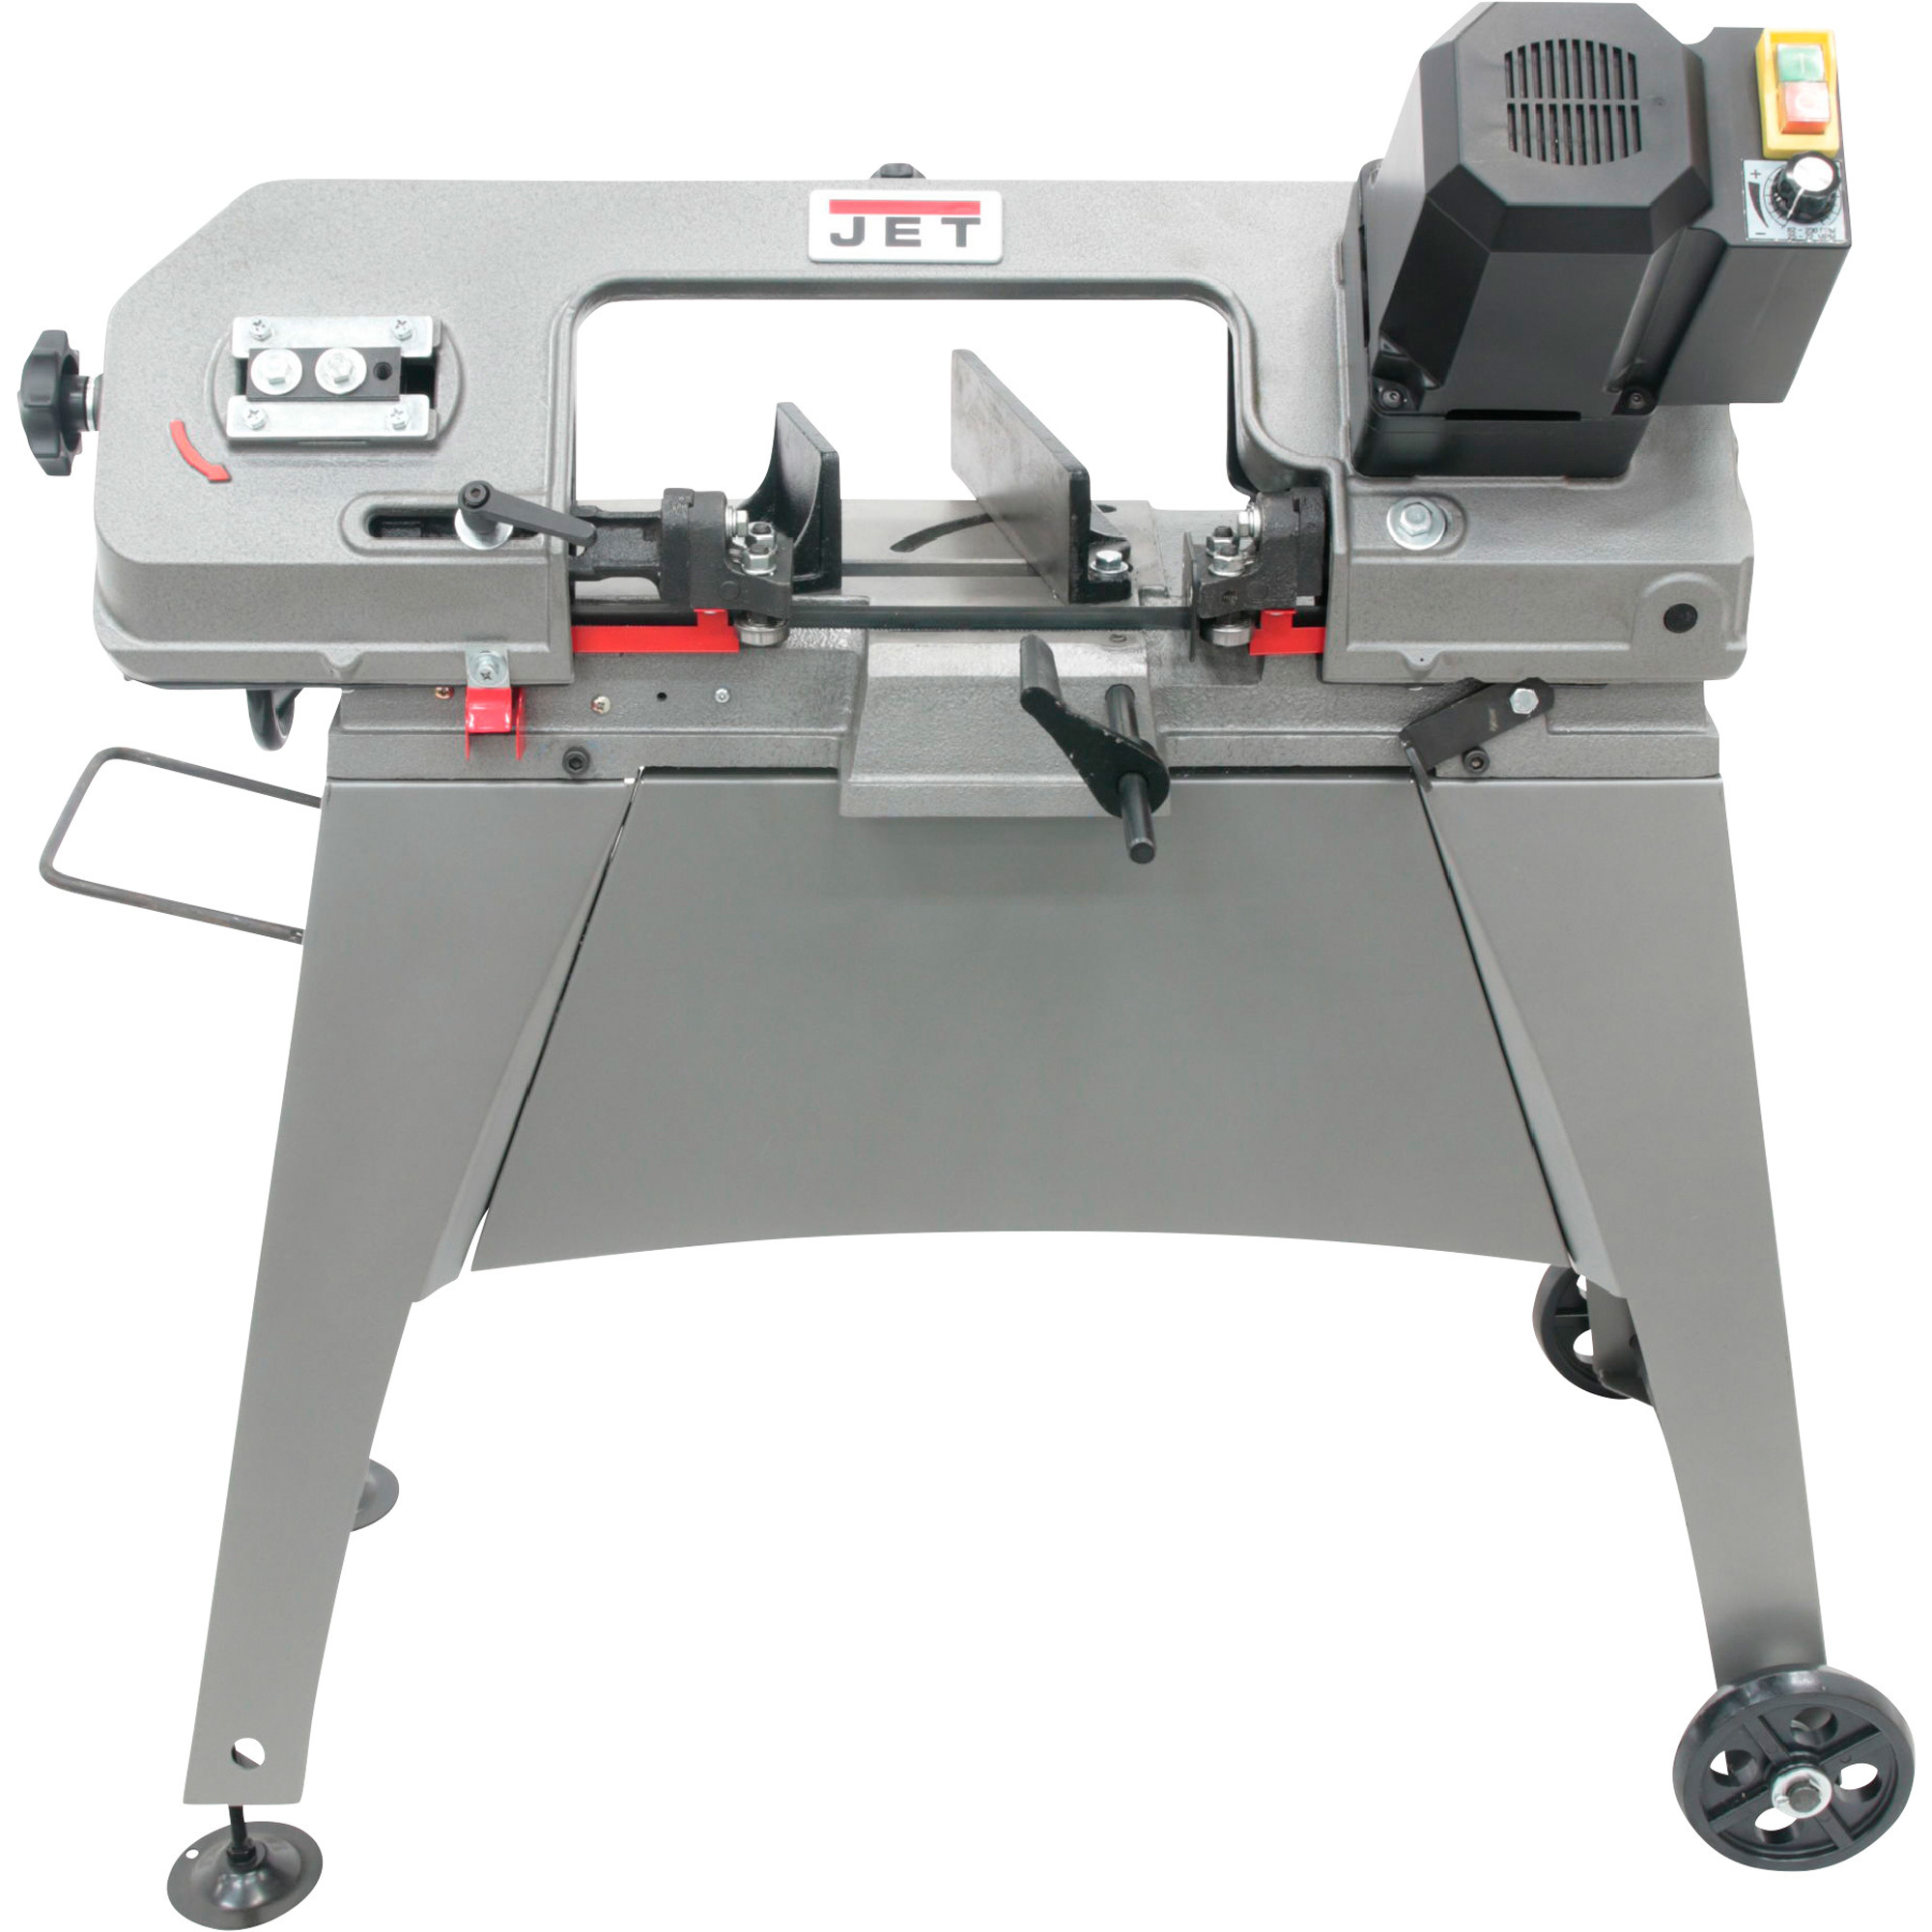 JET Horizontal/Vertical Variable Speed Metal Cutting Band Saw, 5Inch x 6Inch, 1/2HP, 115/230 Volt, Single Phase, Model HVBS-56V